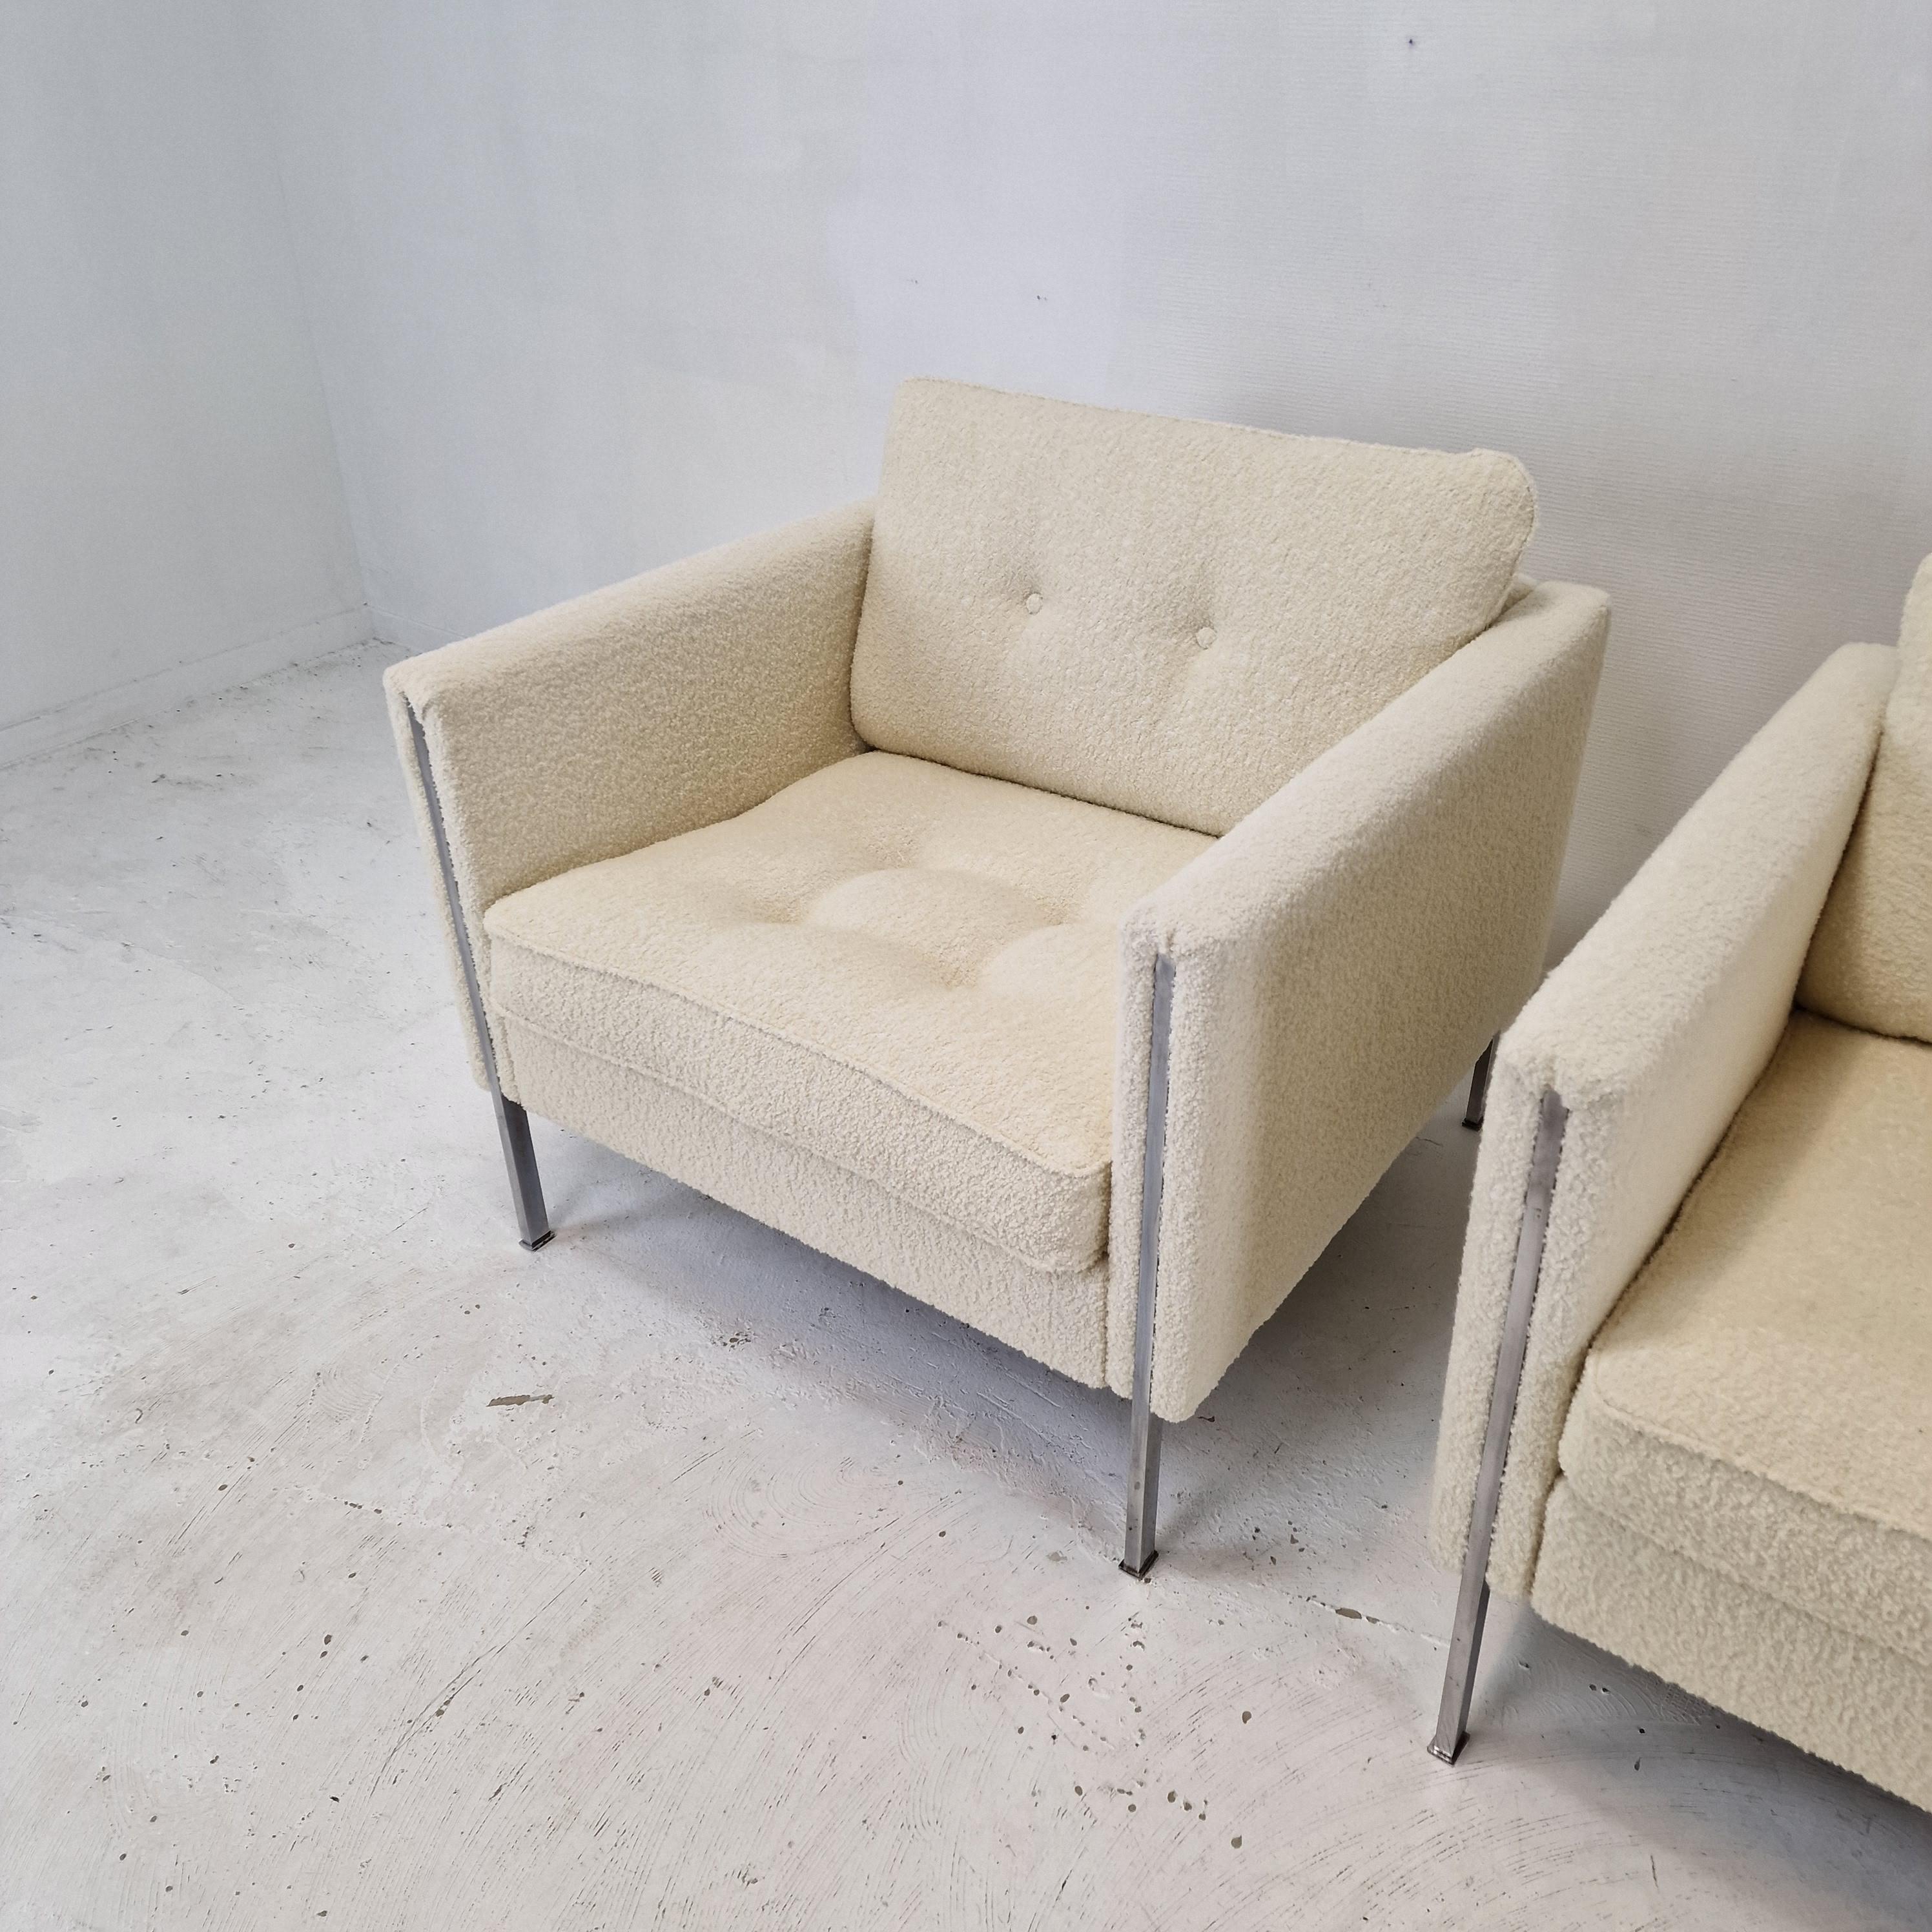 Steel Midcentury Set of 2 Model 442 Chairs by Pierre Paulin for Artifort, 1960s For Sale